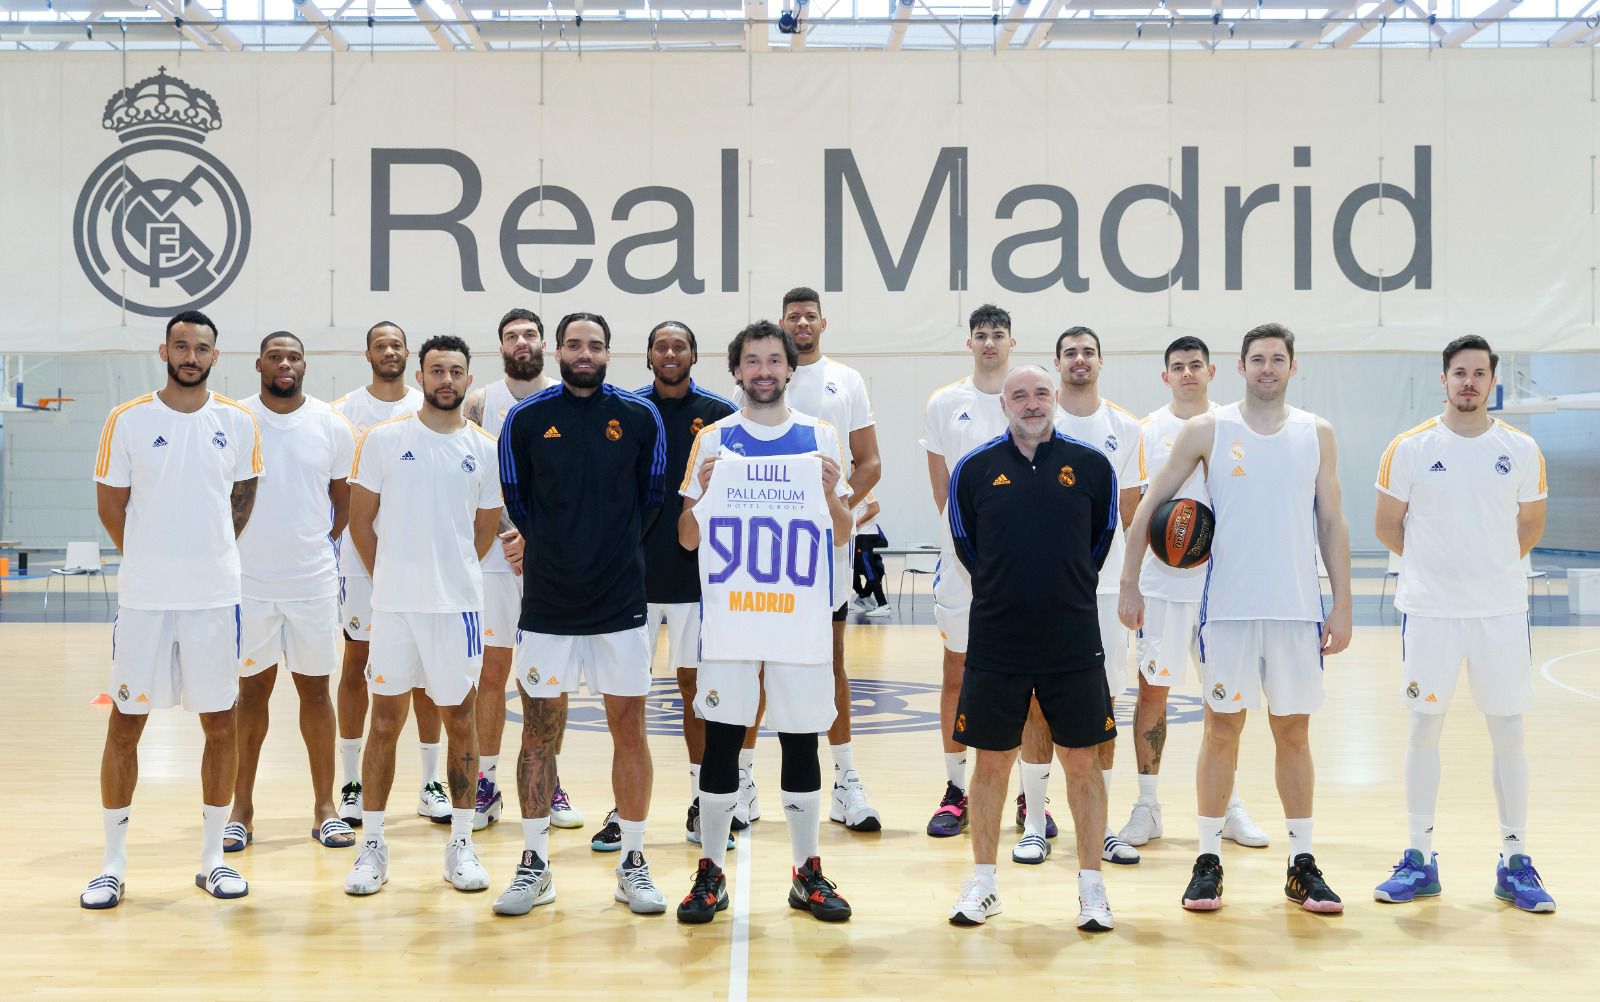 Sergio Llull, 900 games played with Real Madrid